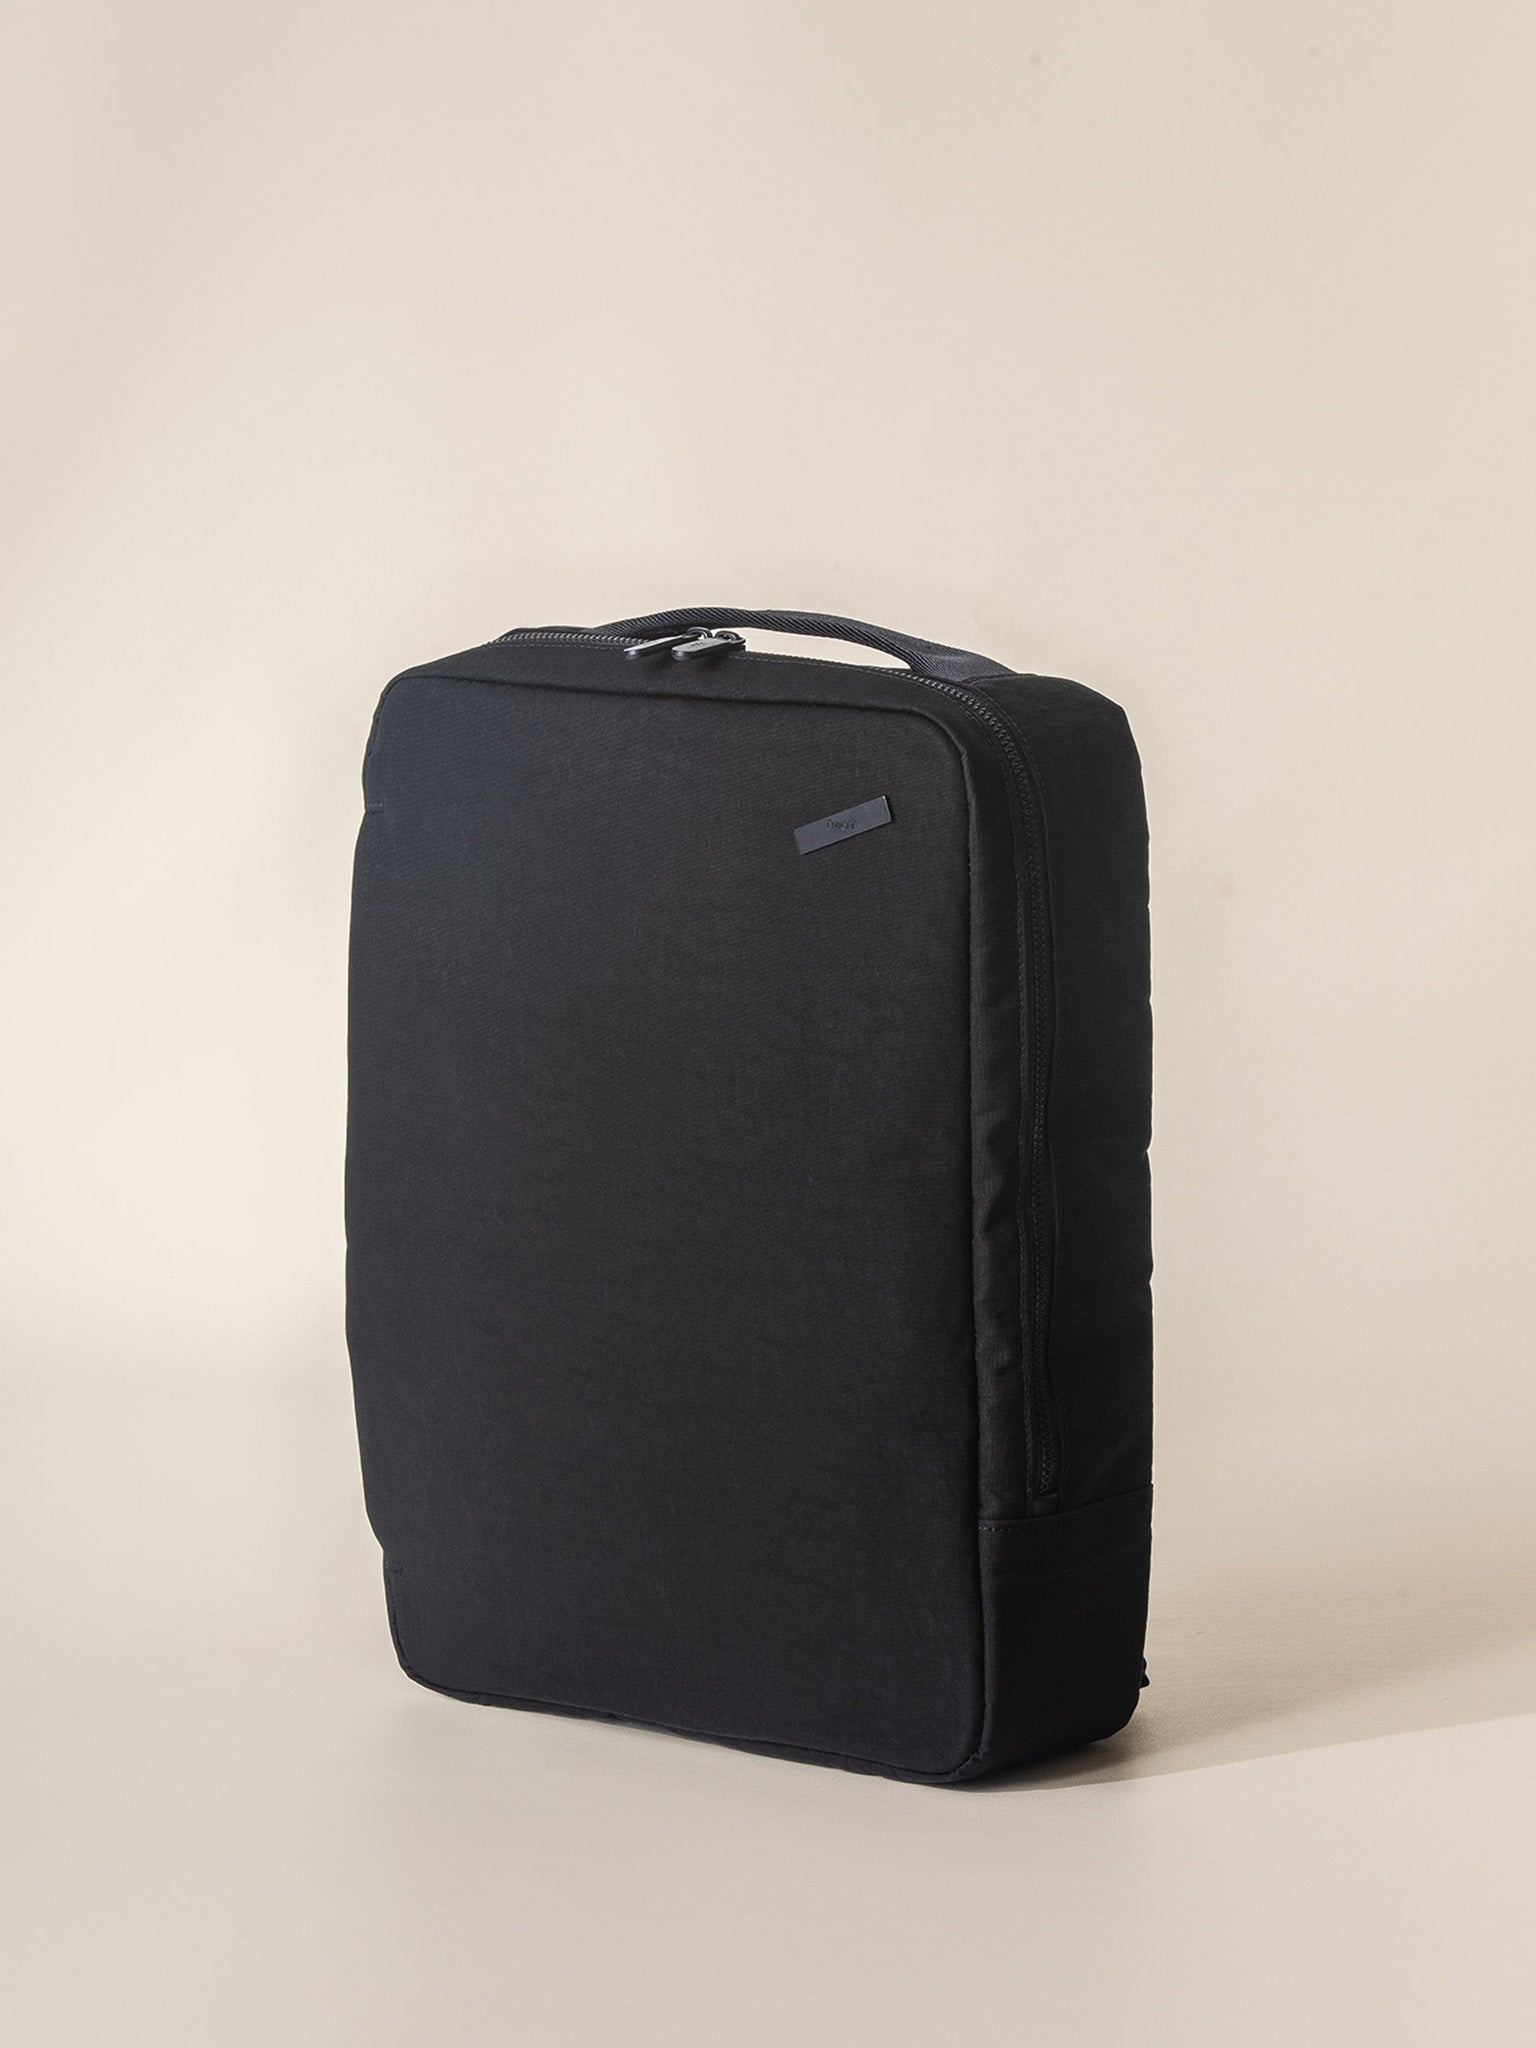 A lightweight and compact black backpack for travel, designed to fit under an airplane seat and carry your laptop, passport, and other important items.